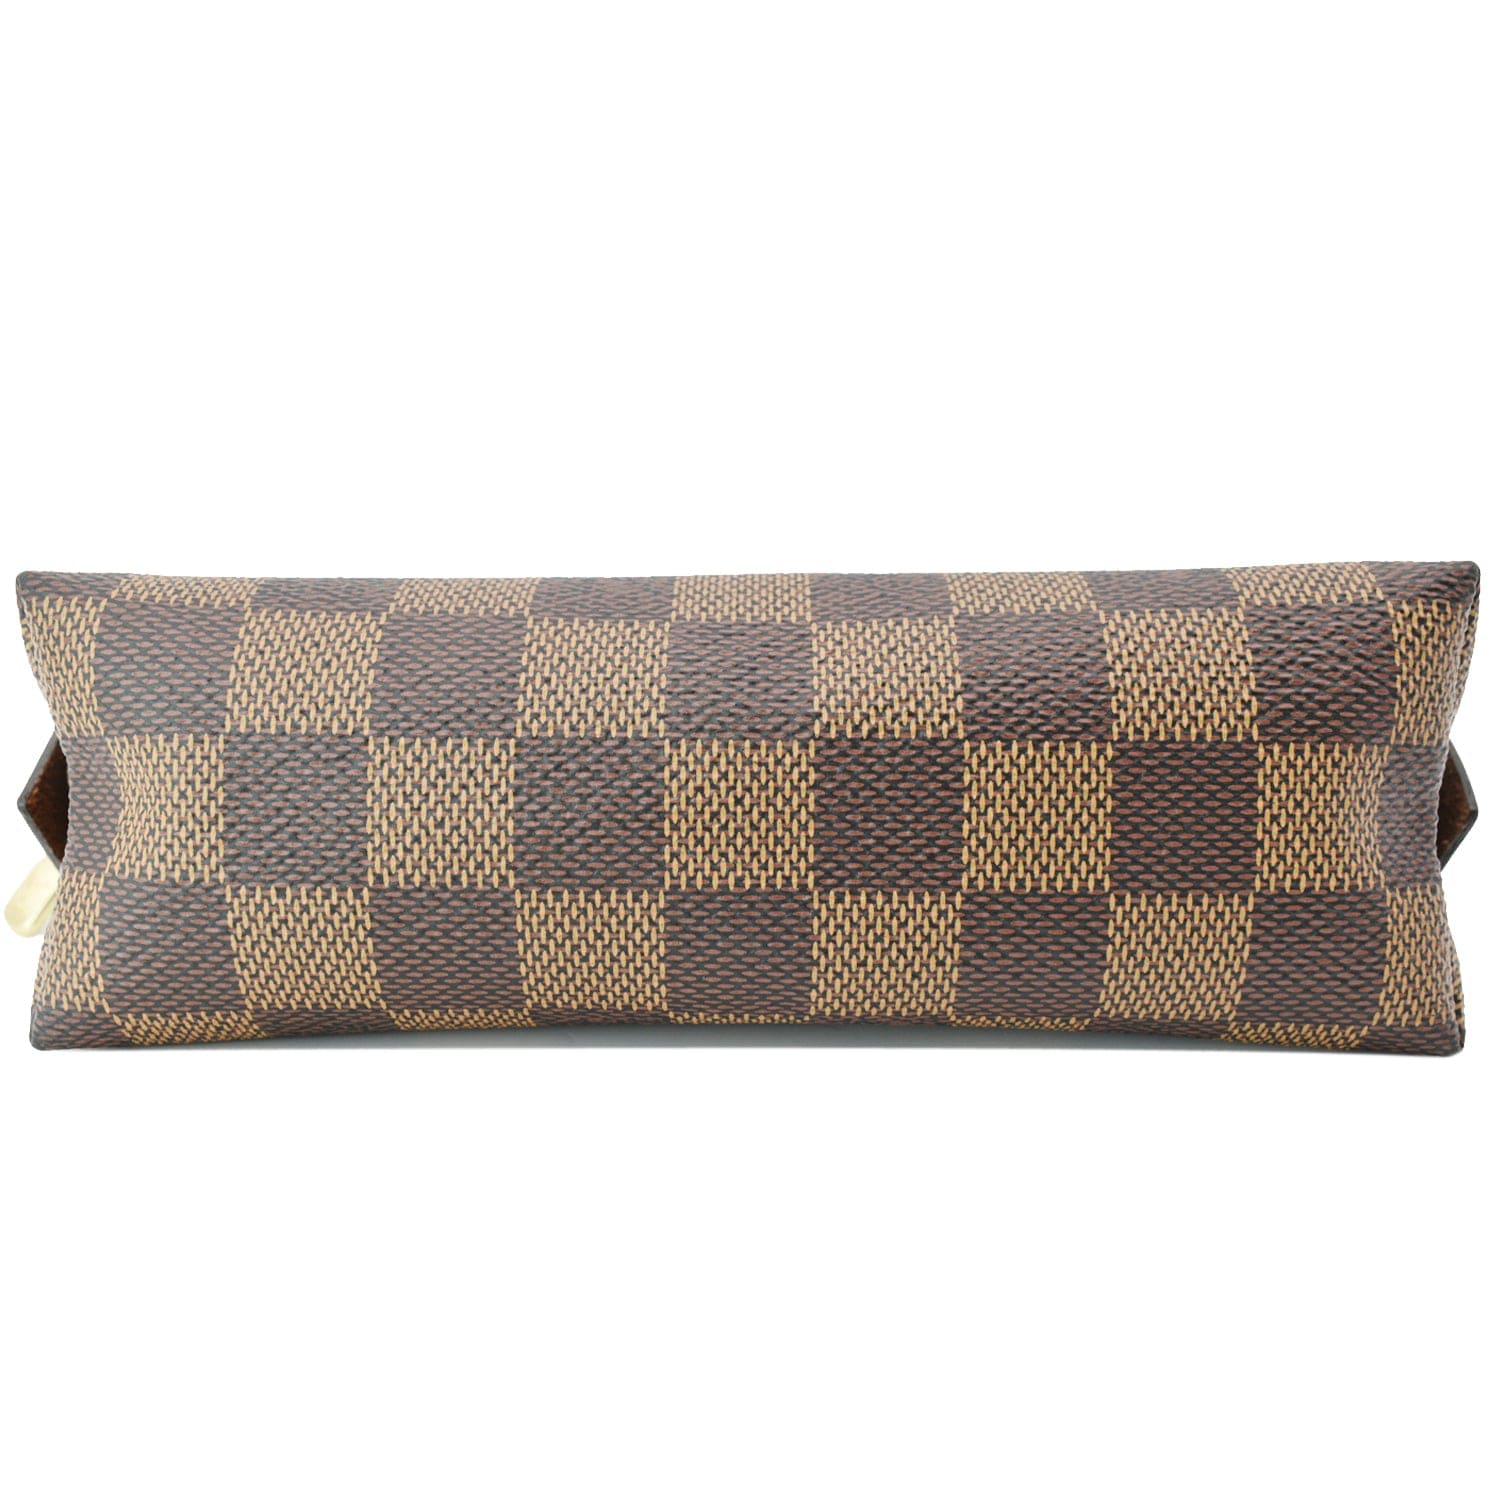 Louis Vuitton Monogram Cosmetic Pouch - Brown Cosmetic Bags, Accessories -  LOU762709